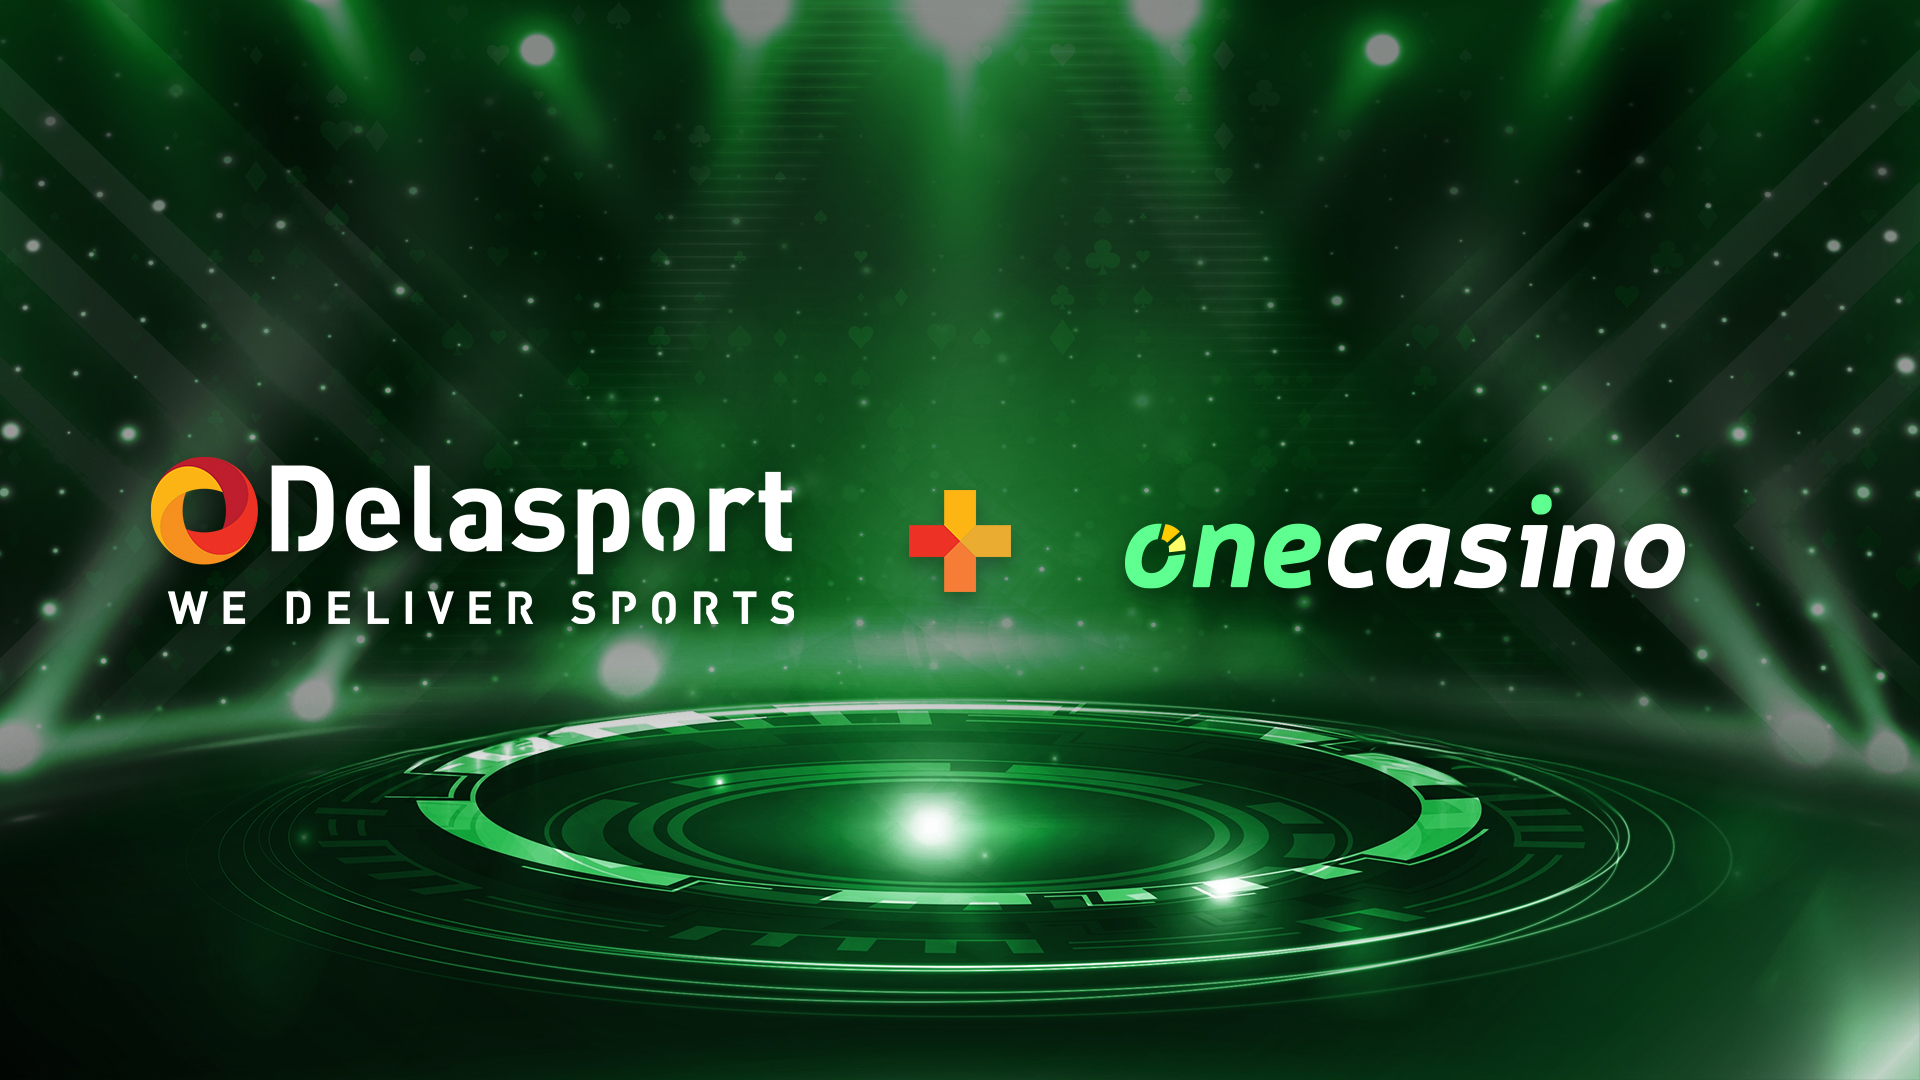 onecasino-partners-with-delasport-to-also-conquer-sports-betting-in-the-netherlands